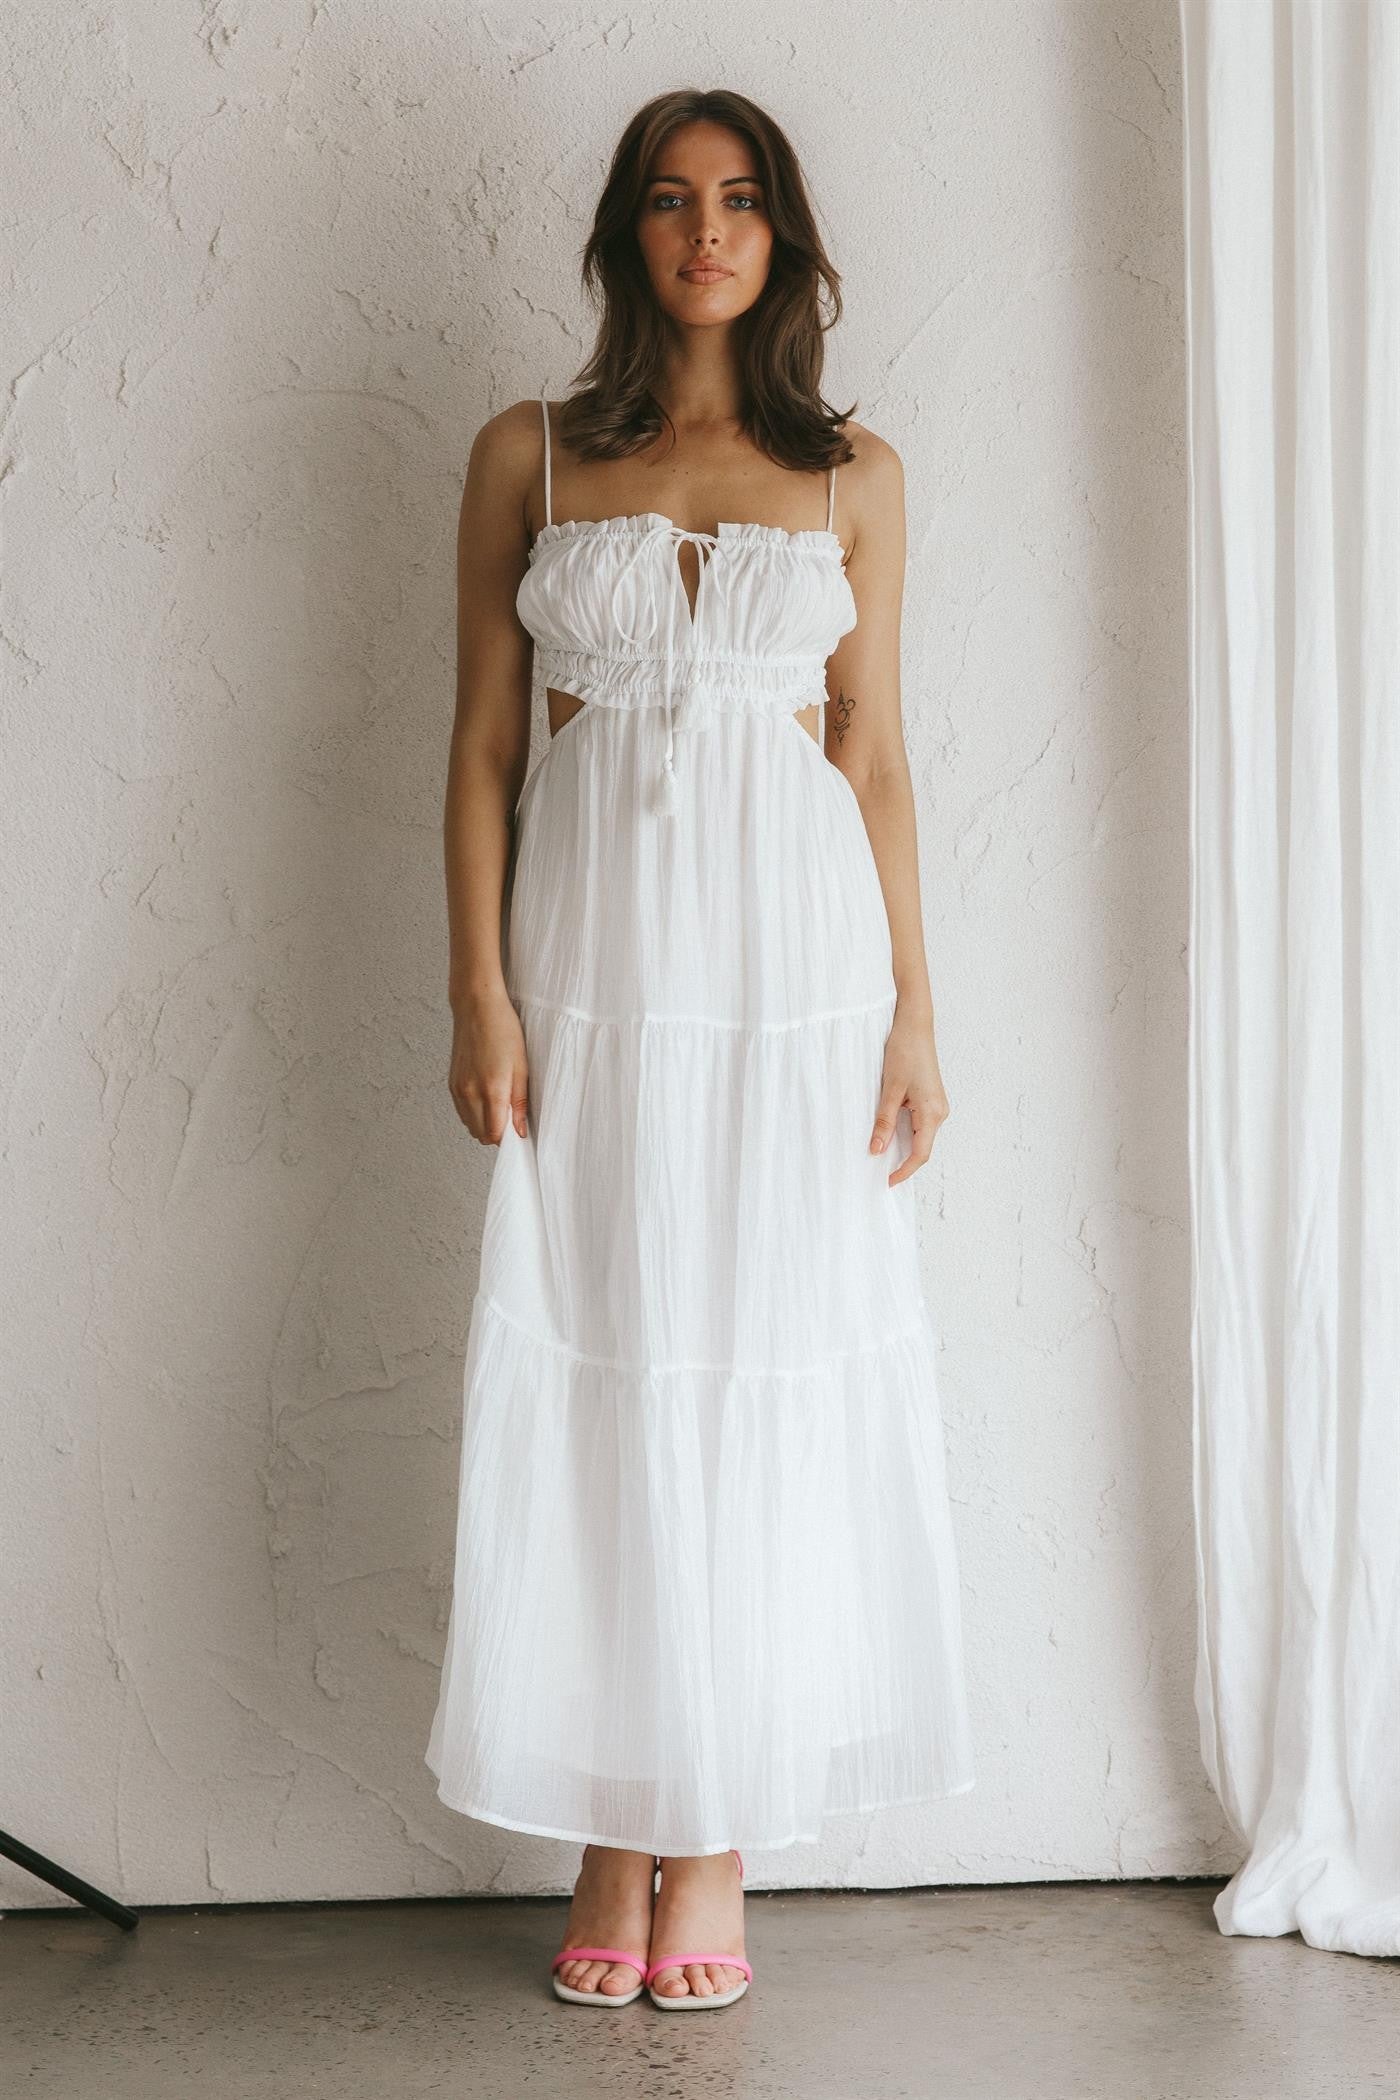 White Lined Dress With Adjustable Thin Straps